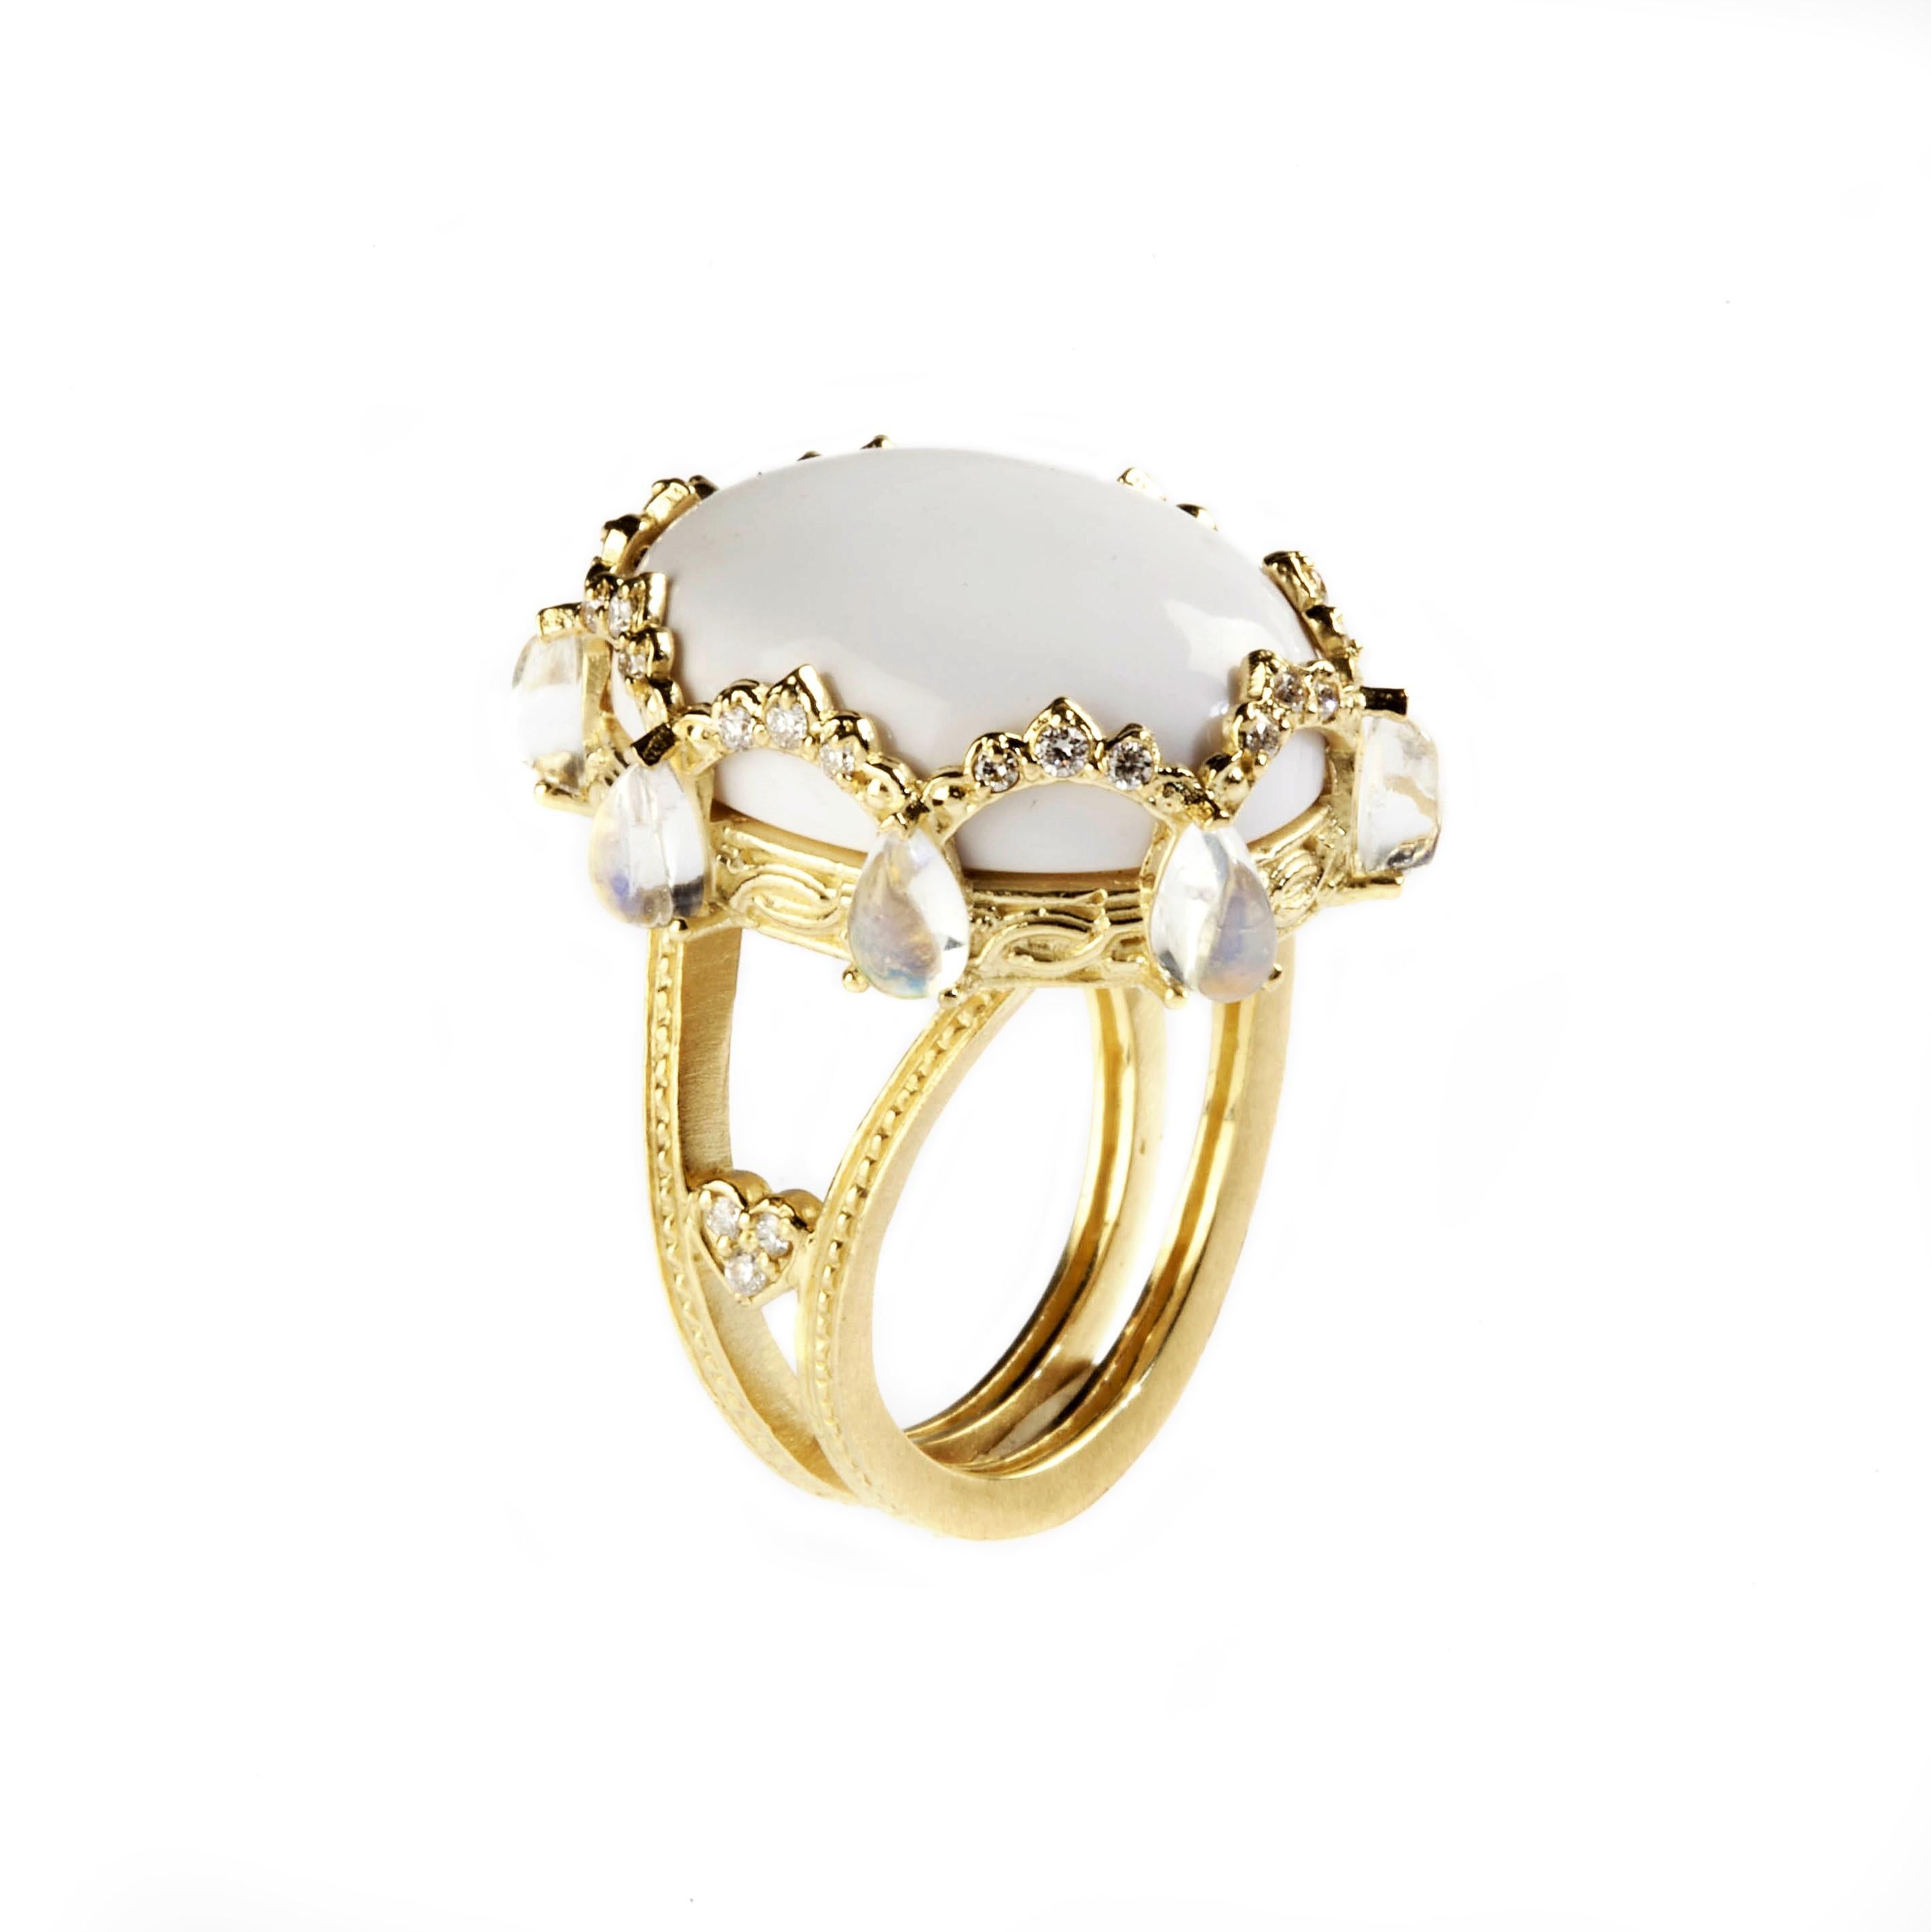 Oval Cut White Agate Diamond Gold Oval Ring with Rainbow Moonstones